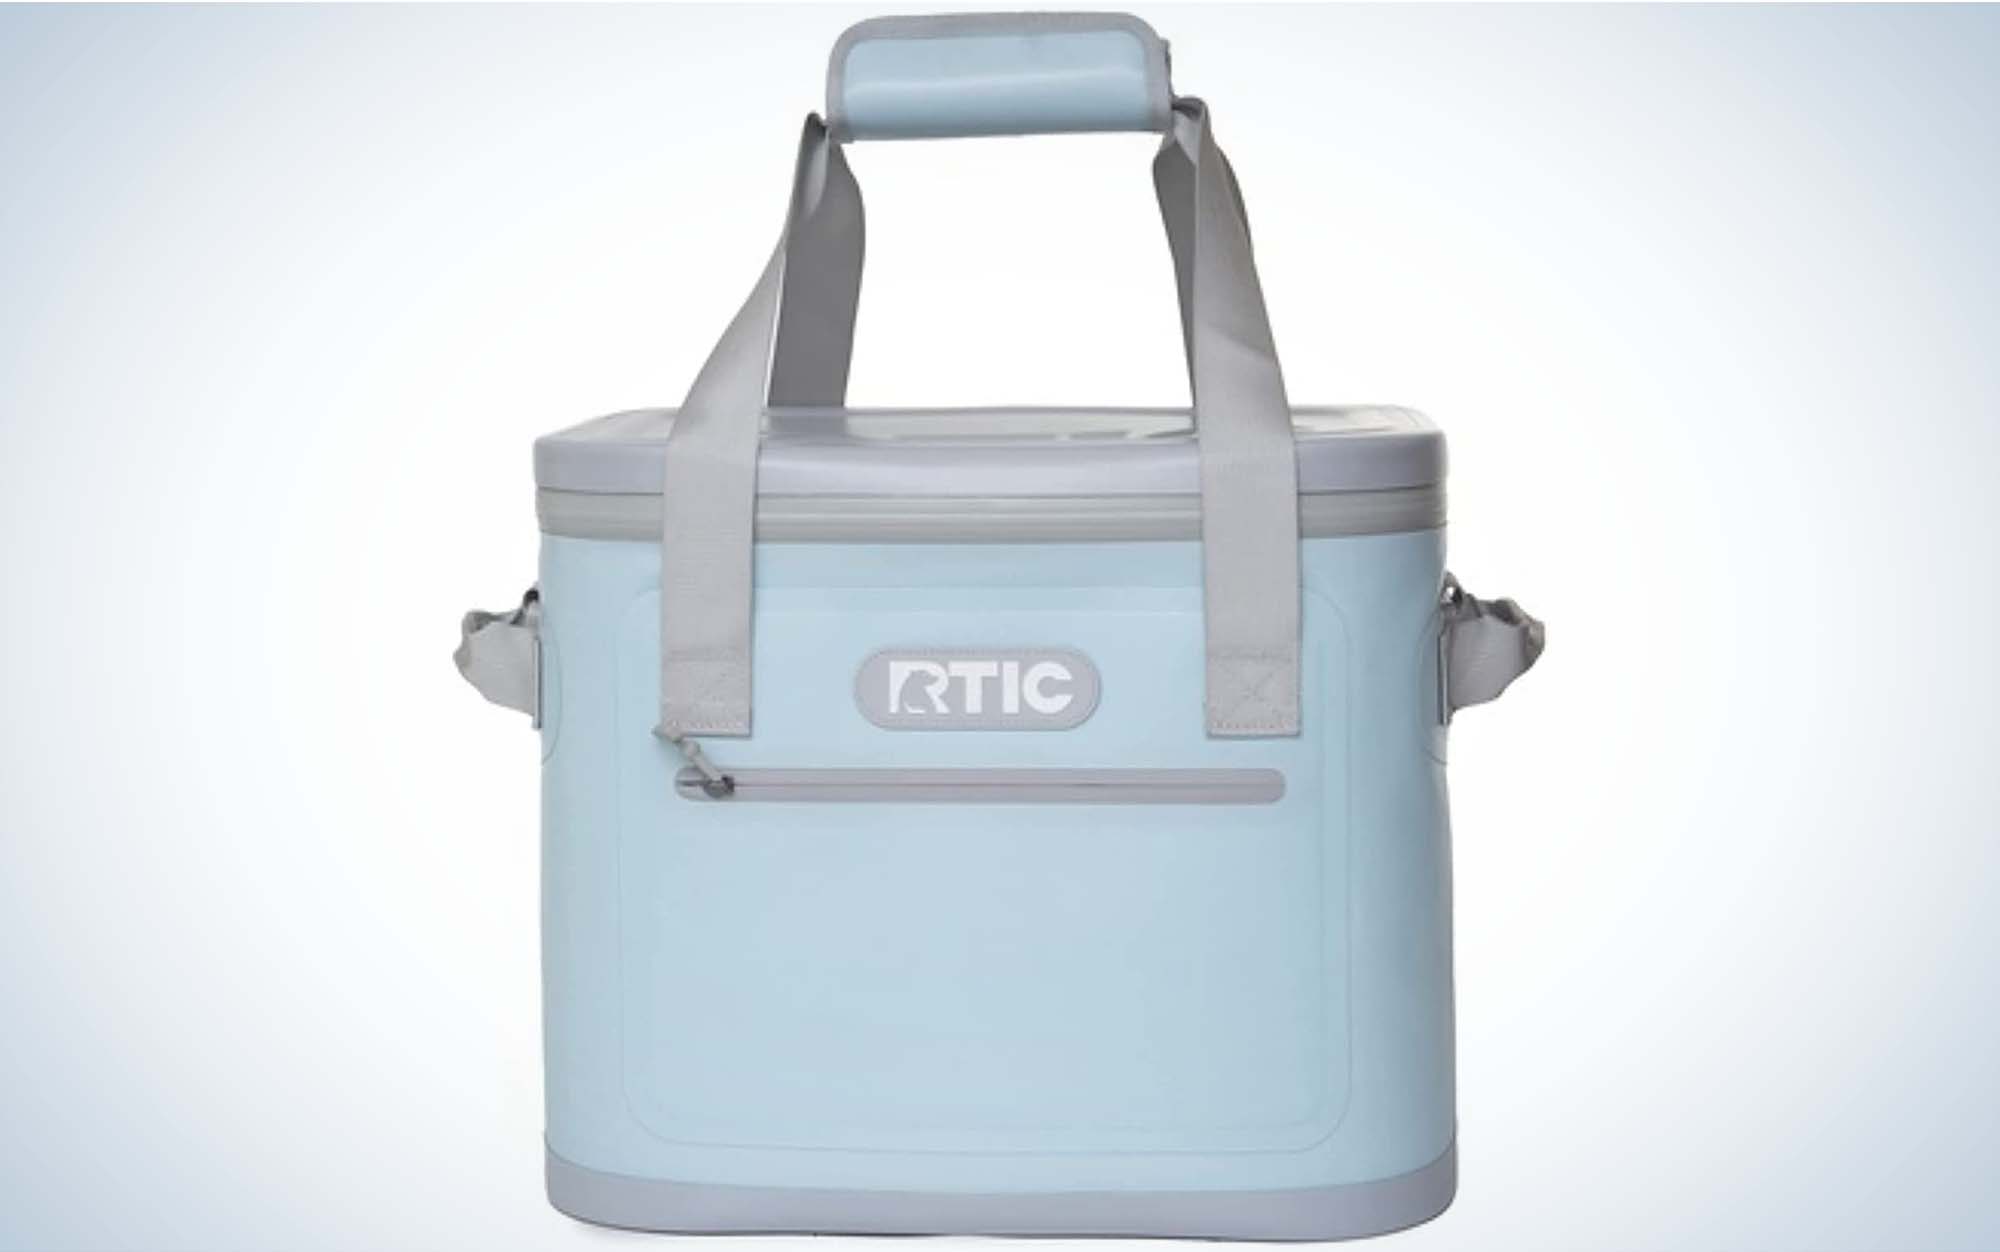 The RTIC Soft Pack 30 is the best budget small cooler.